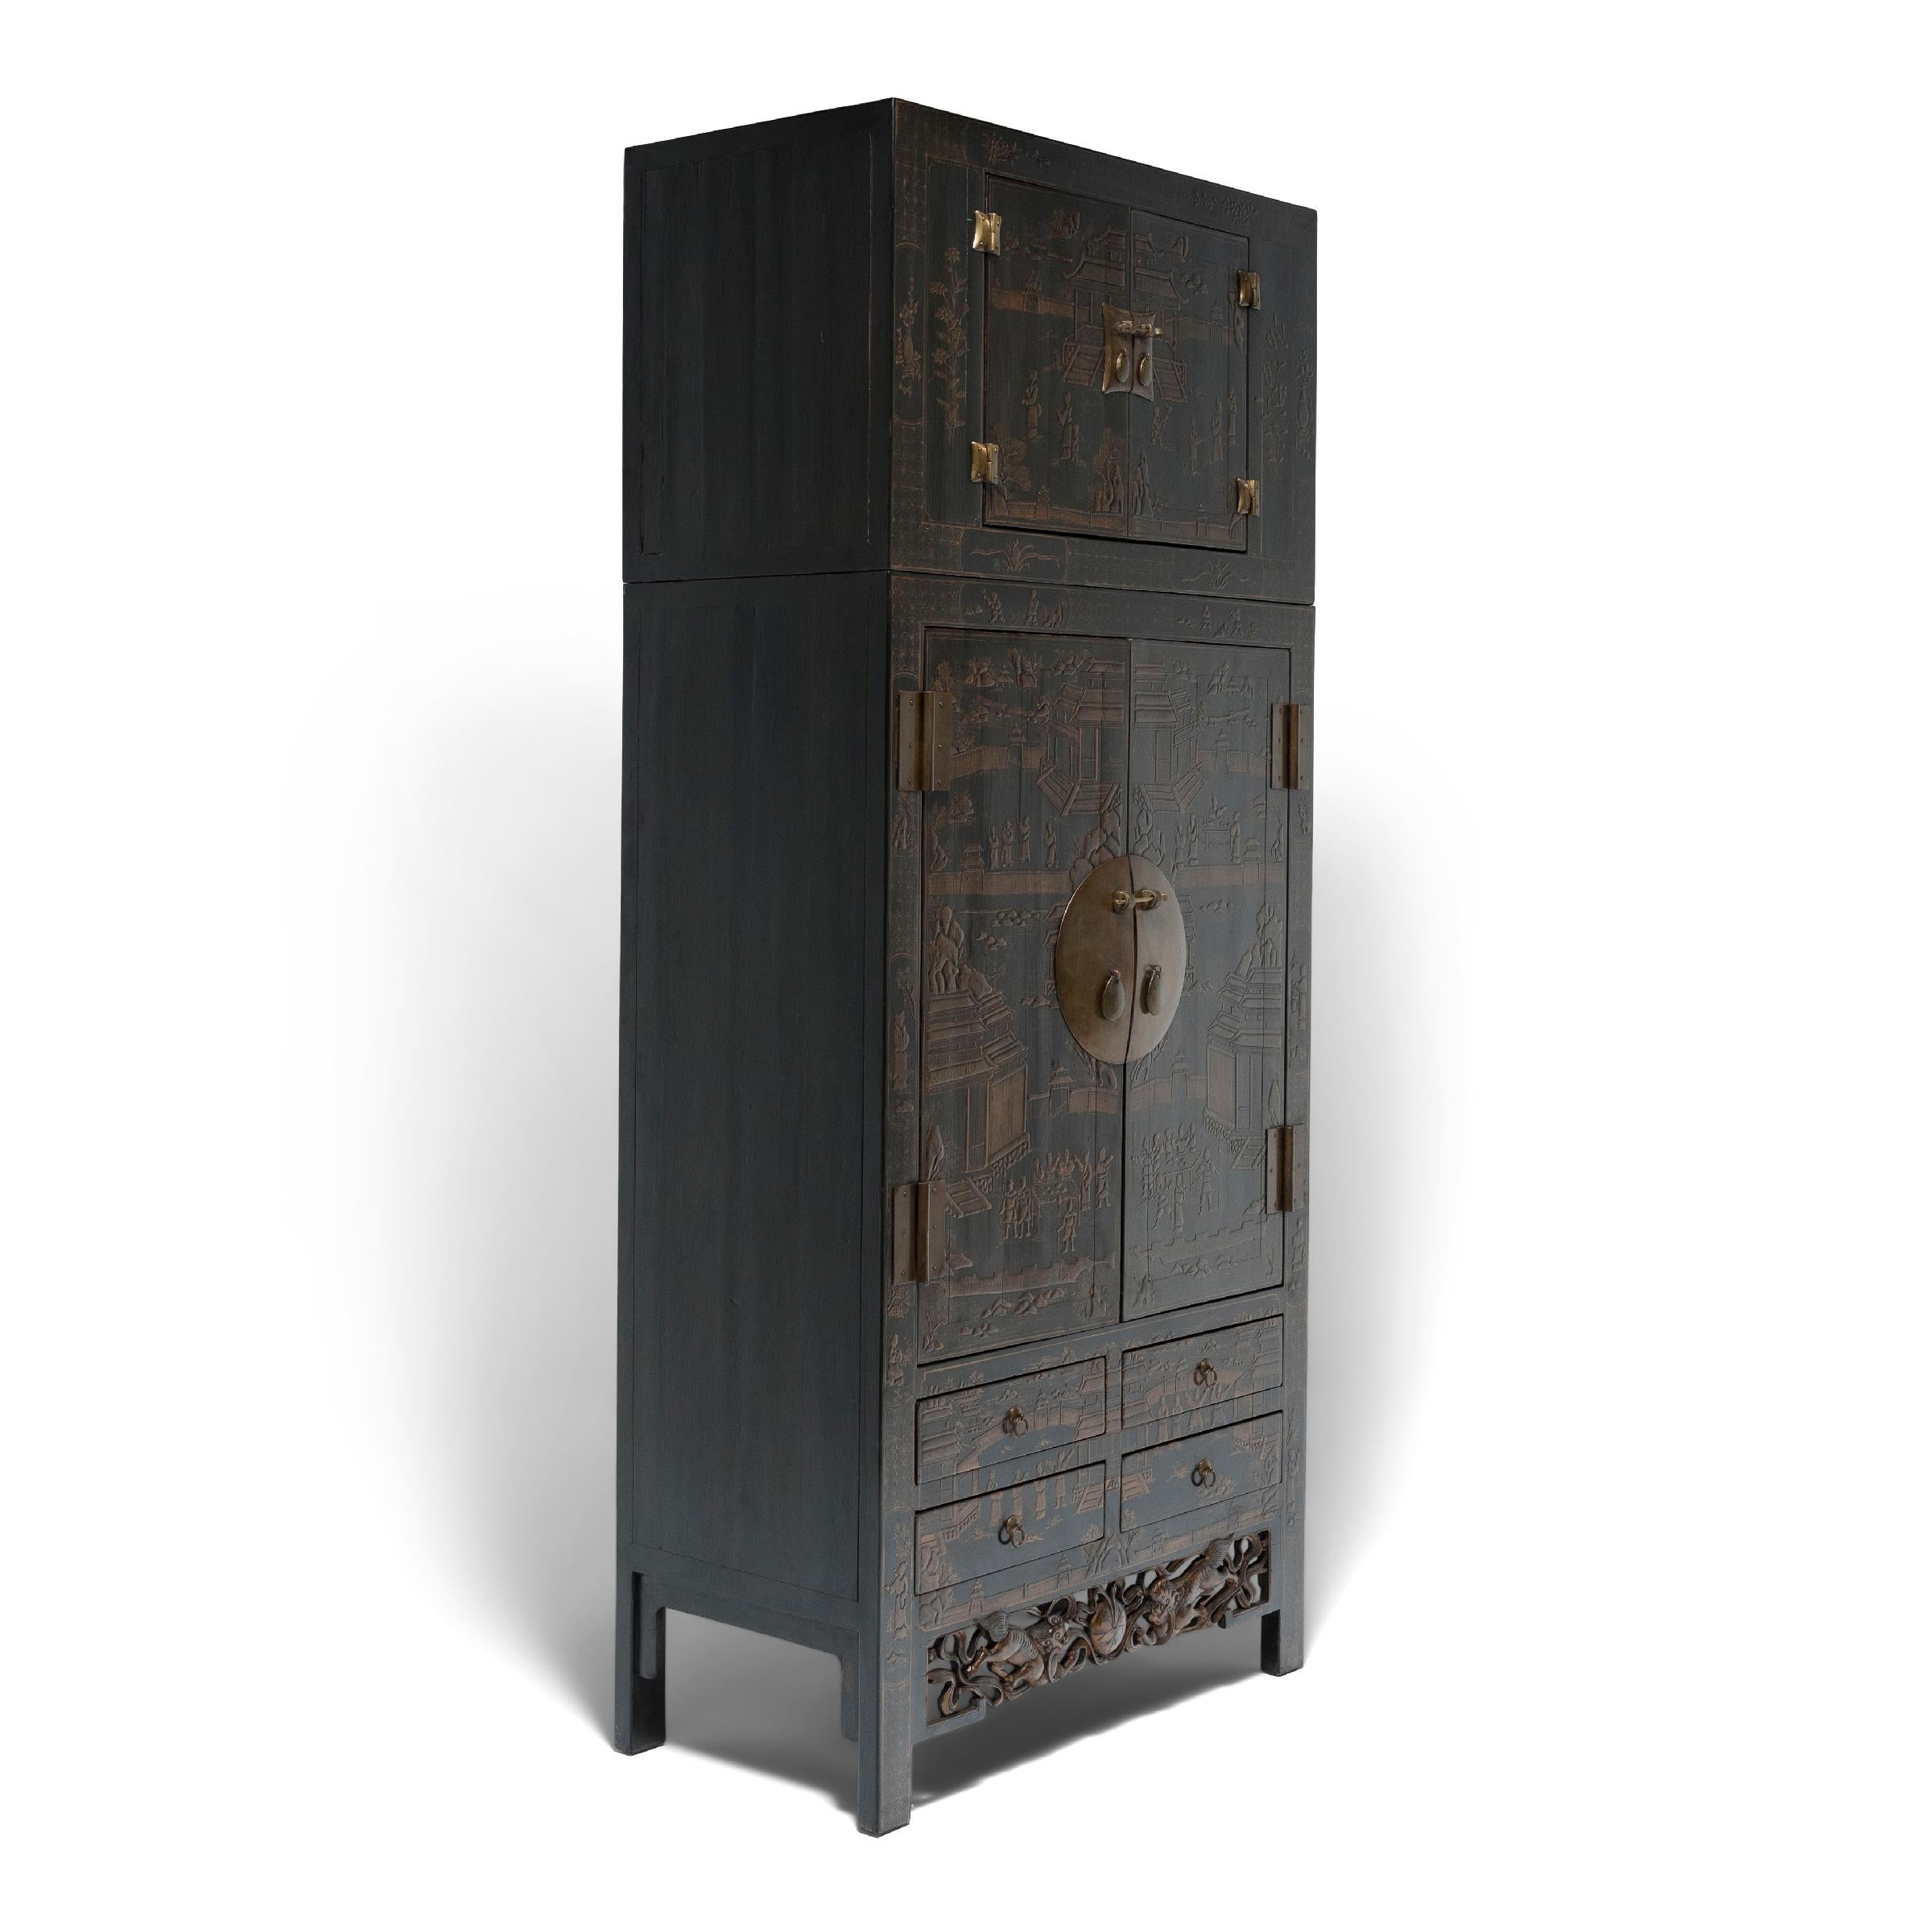 This striking gilt lacquer compound cabinet commands its surroundings with grand scale and lavish decoration. Seamlessly constructed of northern elm (yumu), the tall cabinet is actually comprised of two stacked storage compartments. The upper